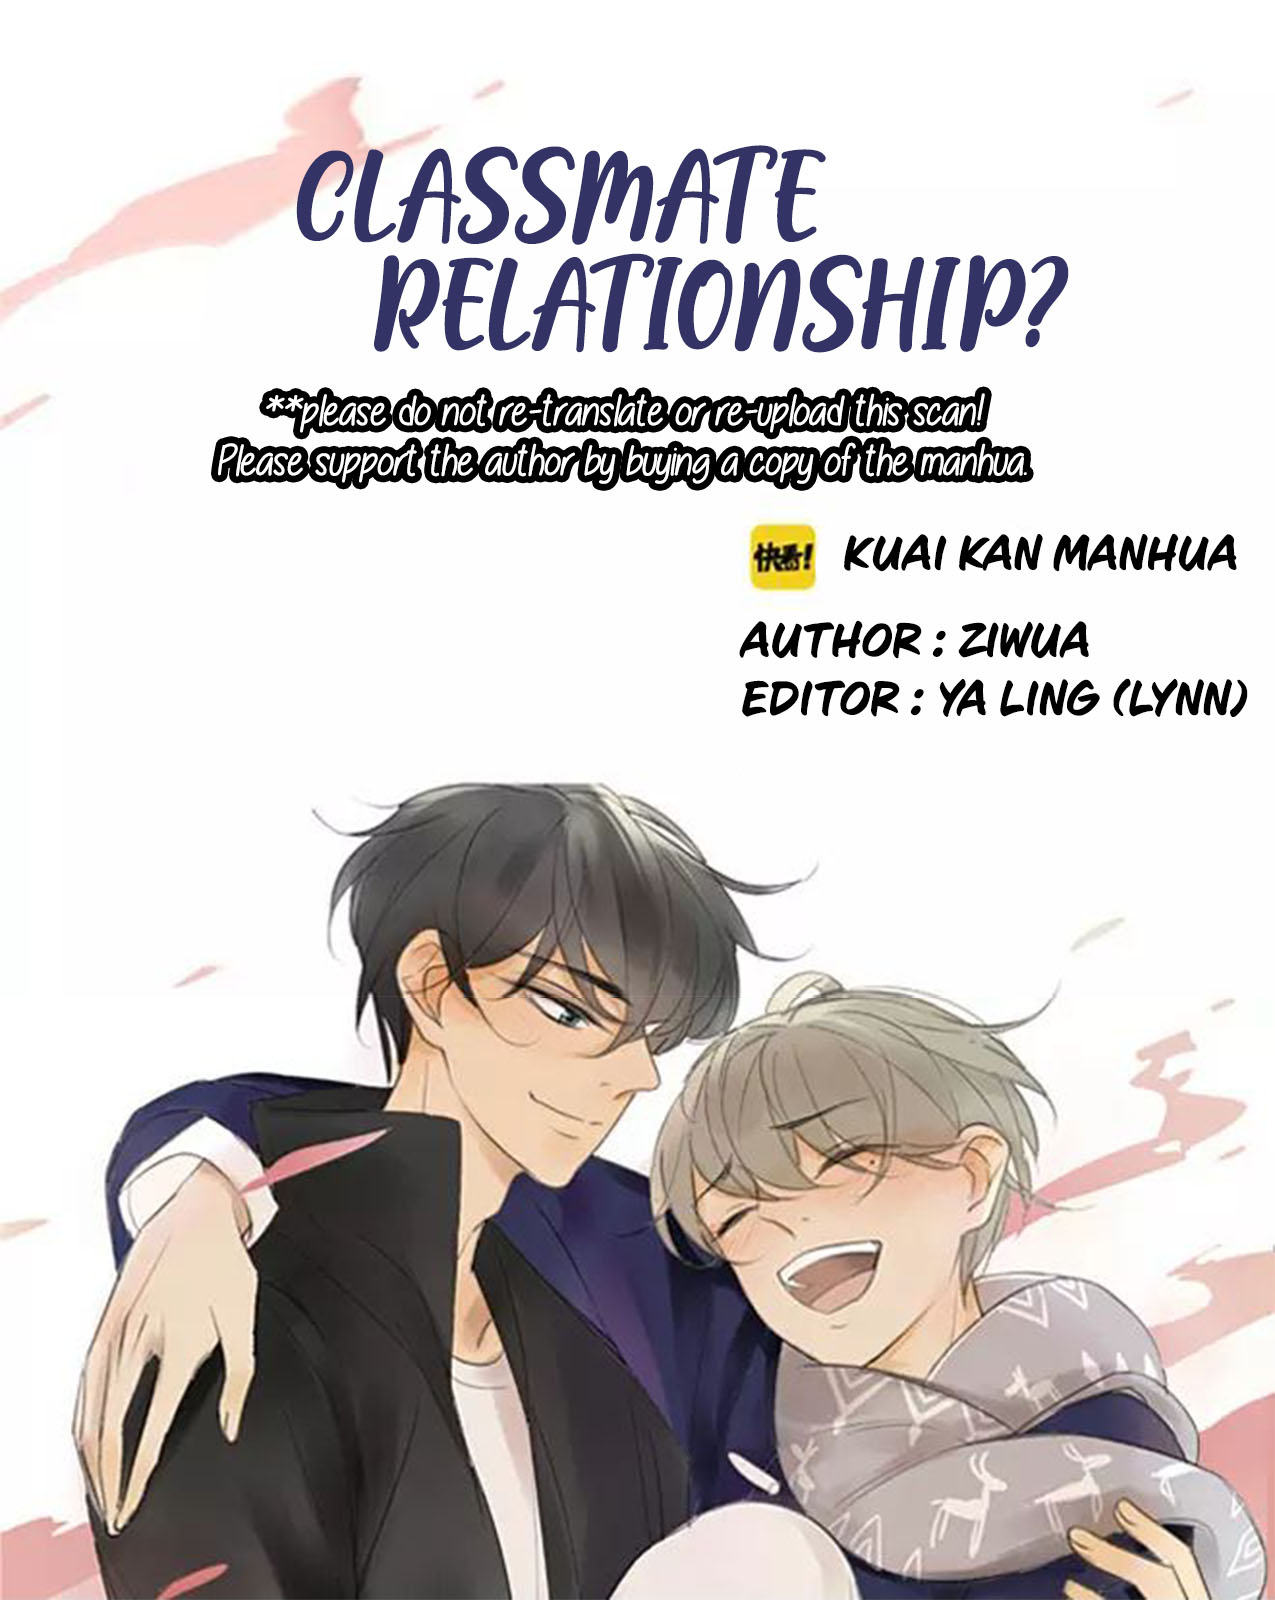 Classmate Relationship? Ch. 28 Please don't hold any expectations of me